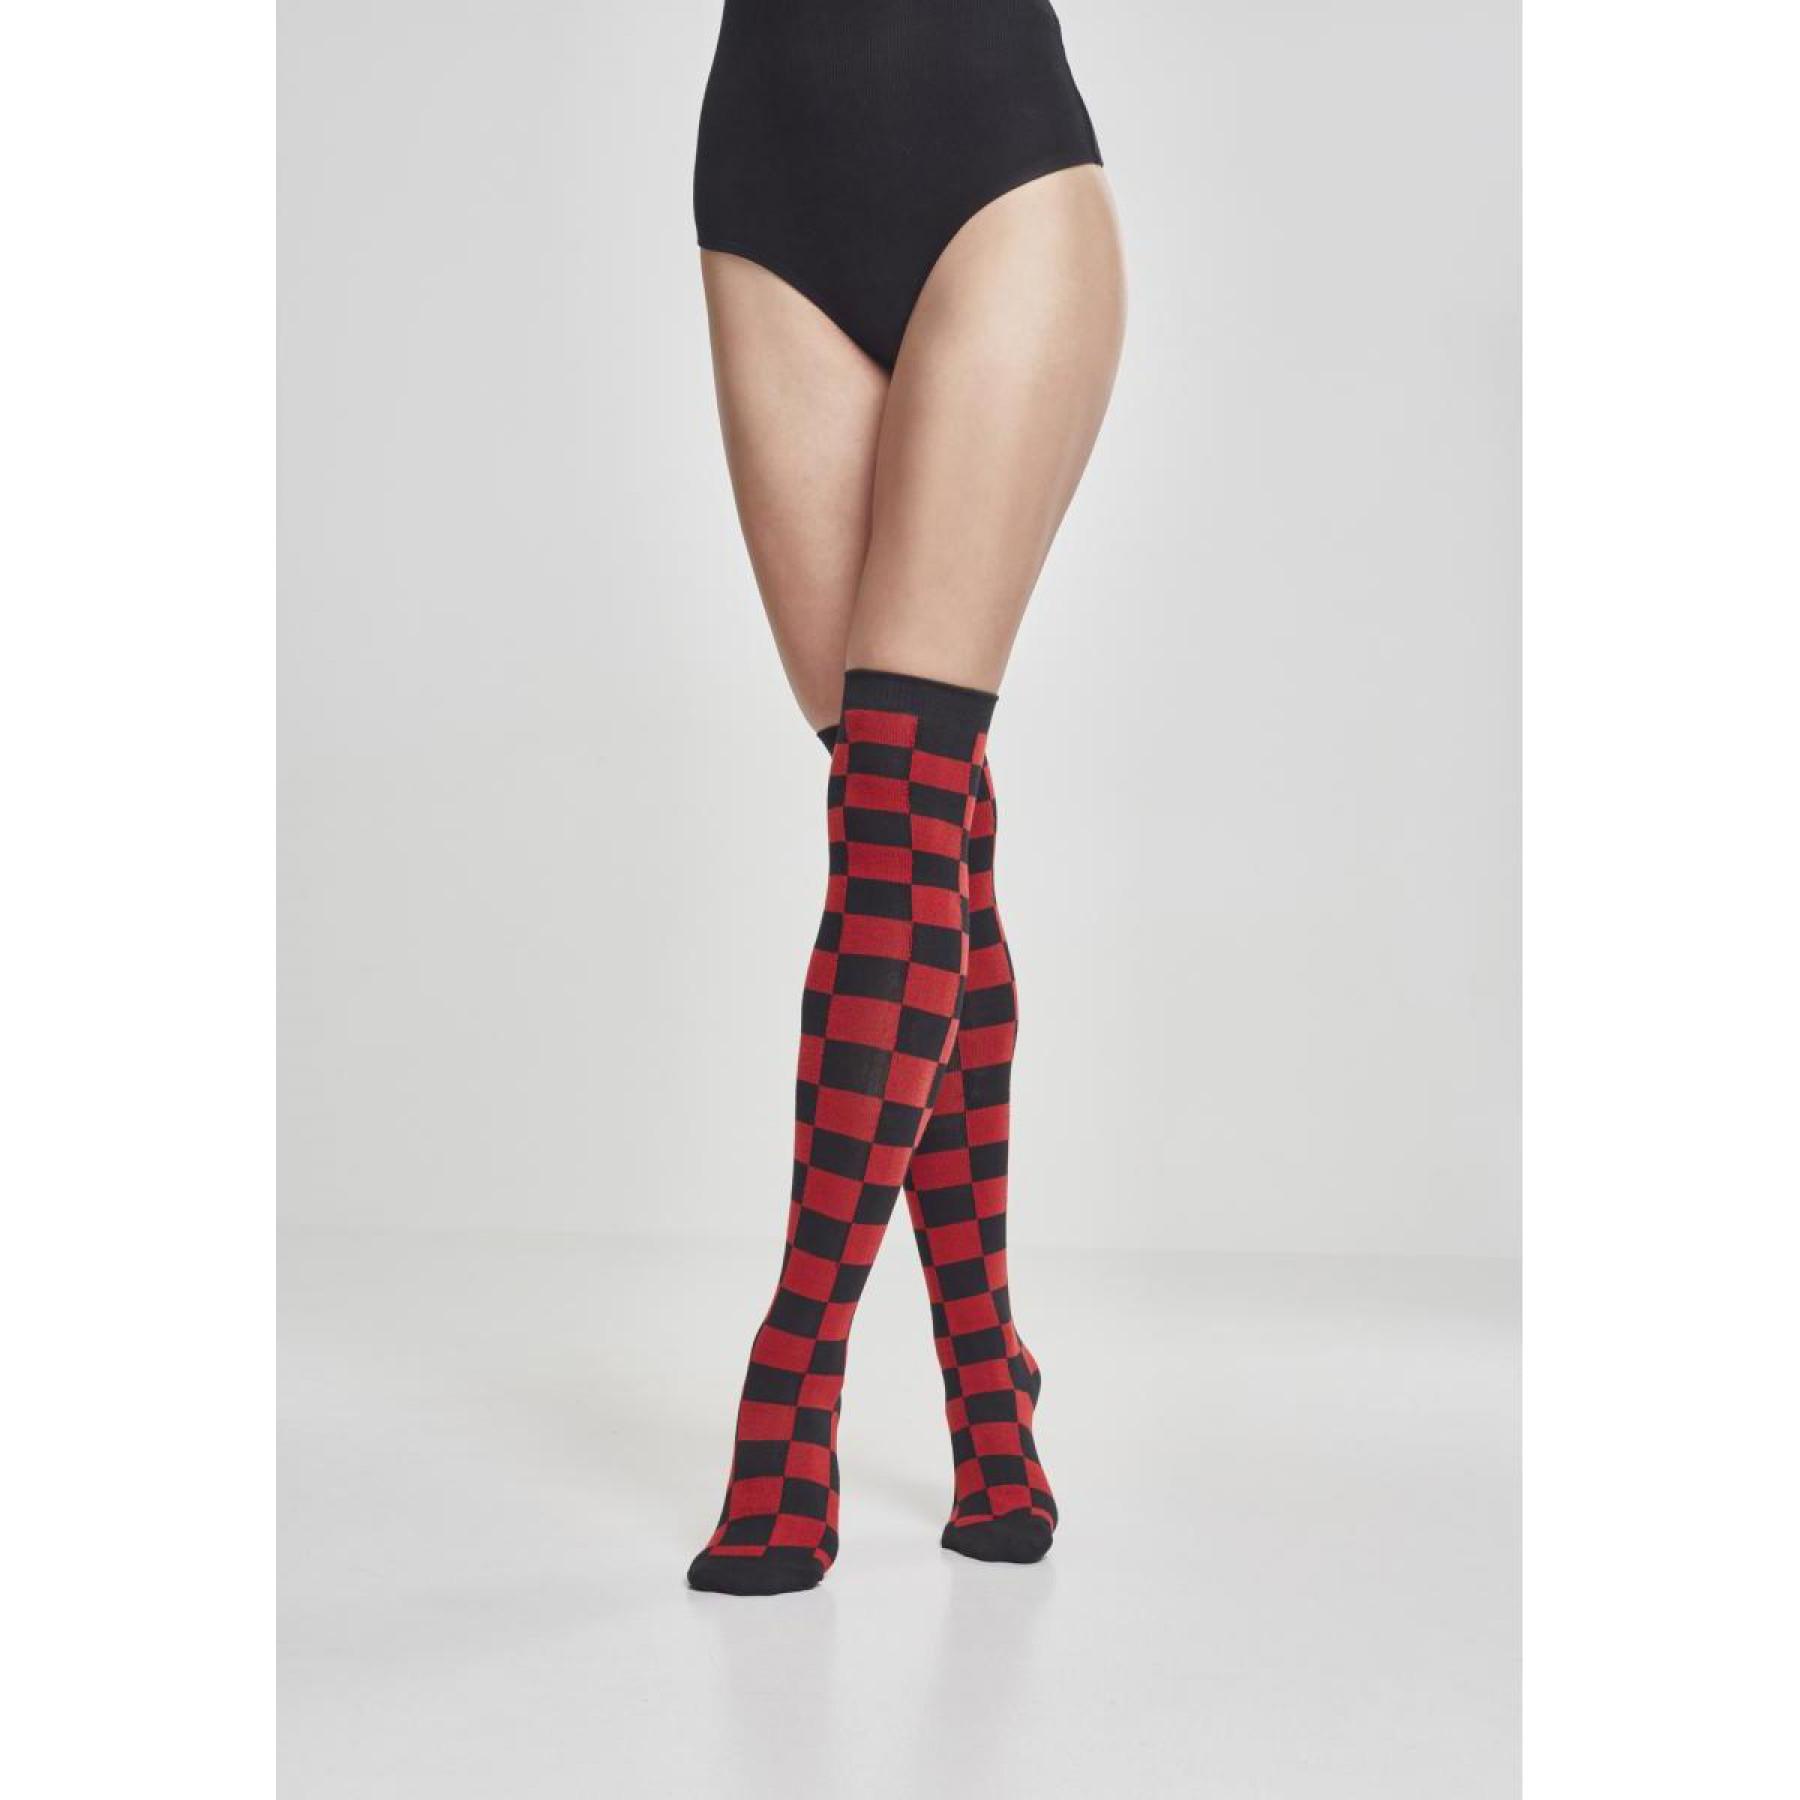 Chaussettes femme Urban Classic checkerboard